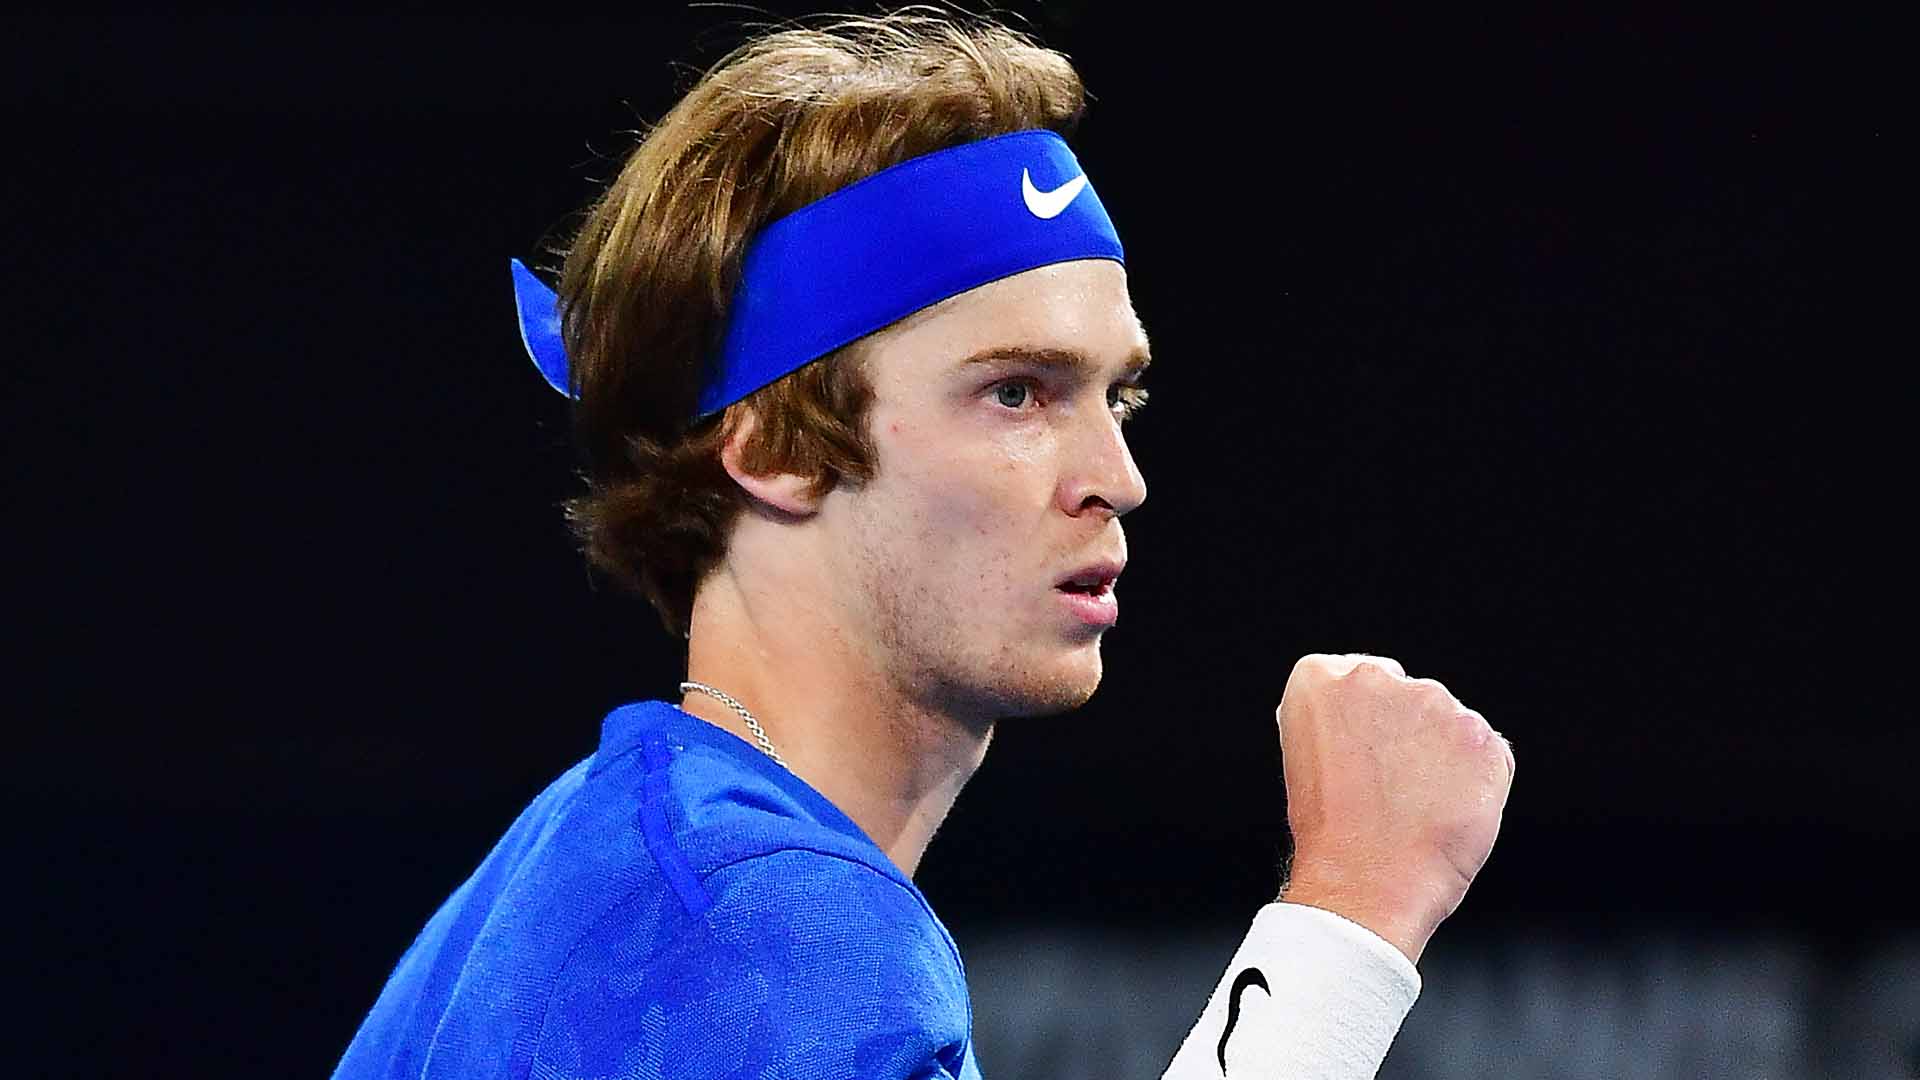 ADELAIDE, AUSTRALIA - JANUARY 17: Andrey Rublev of Russia celebrates winning a set against Felix Auger-Aliassime of Canada during day six of the 2020 Adelaide International at Memorial Drive on January 17, 2020 in Adelaide, Australia. (Photo by Mark Brake/Getty Images)